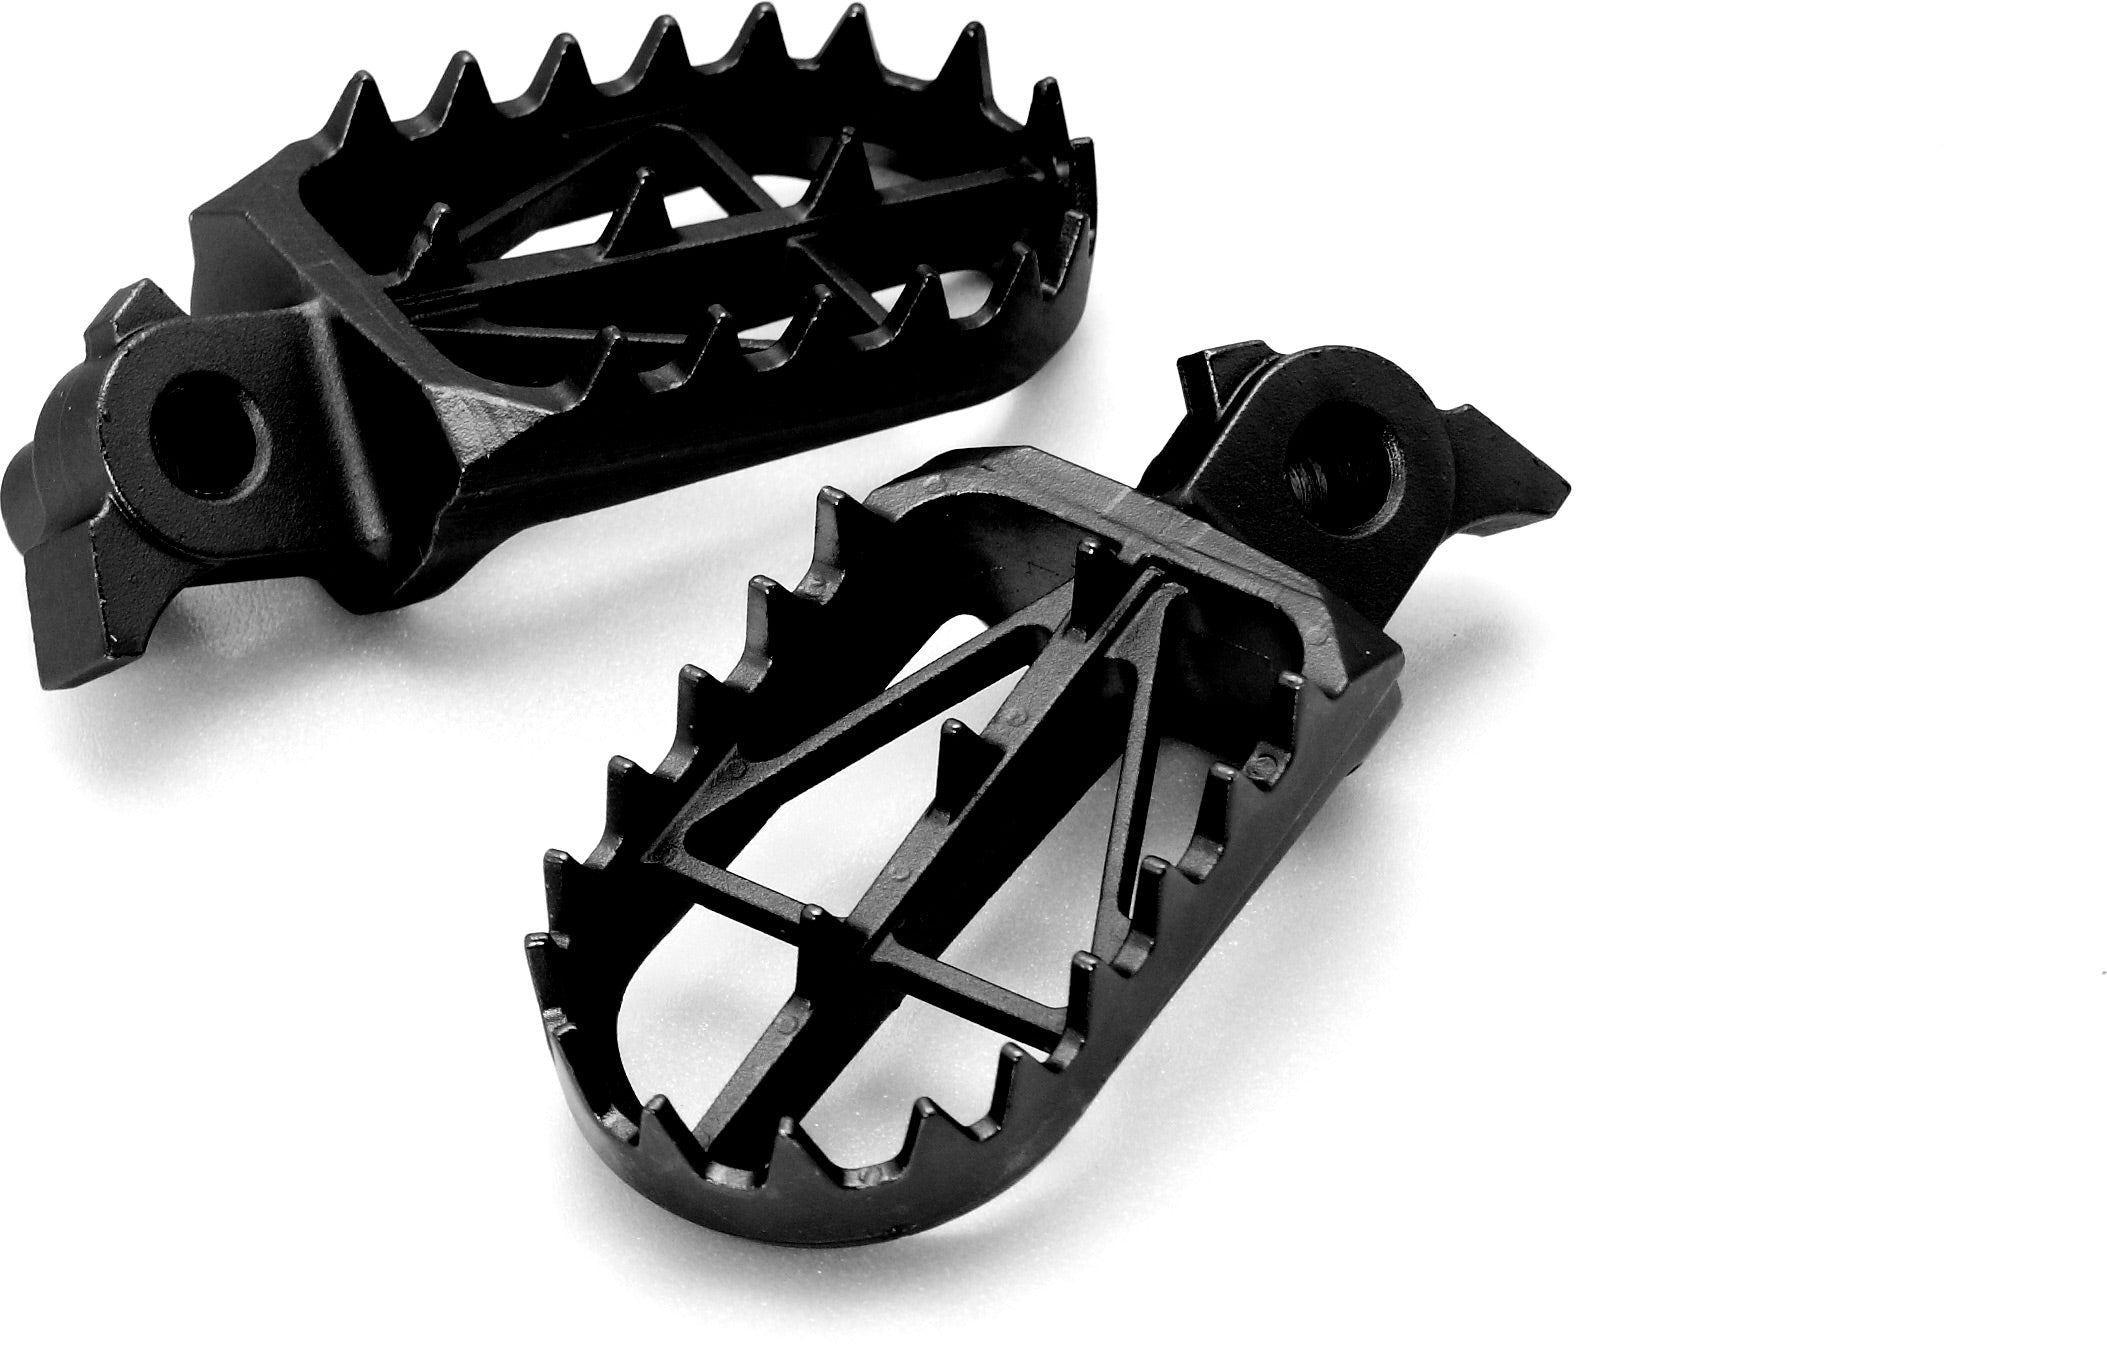 Wide Foot Pegs for KTM 125-500 models 1998-2015 and Husqvarna motorcycles most models 2014-2016, showing enhanced grip and durability